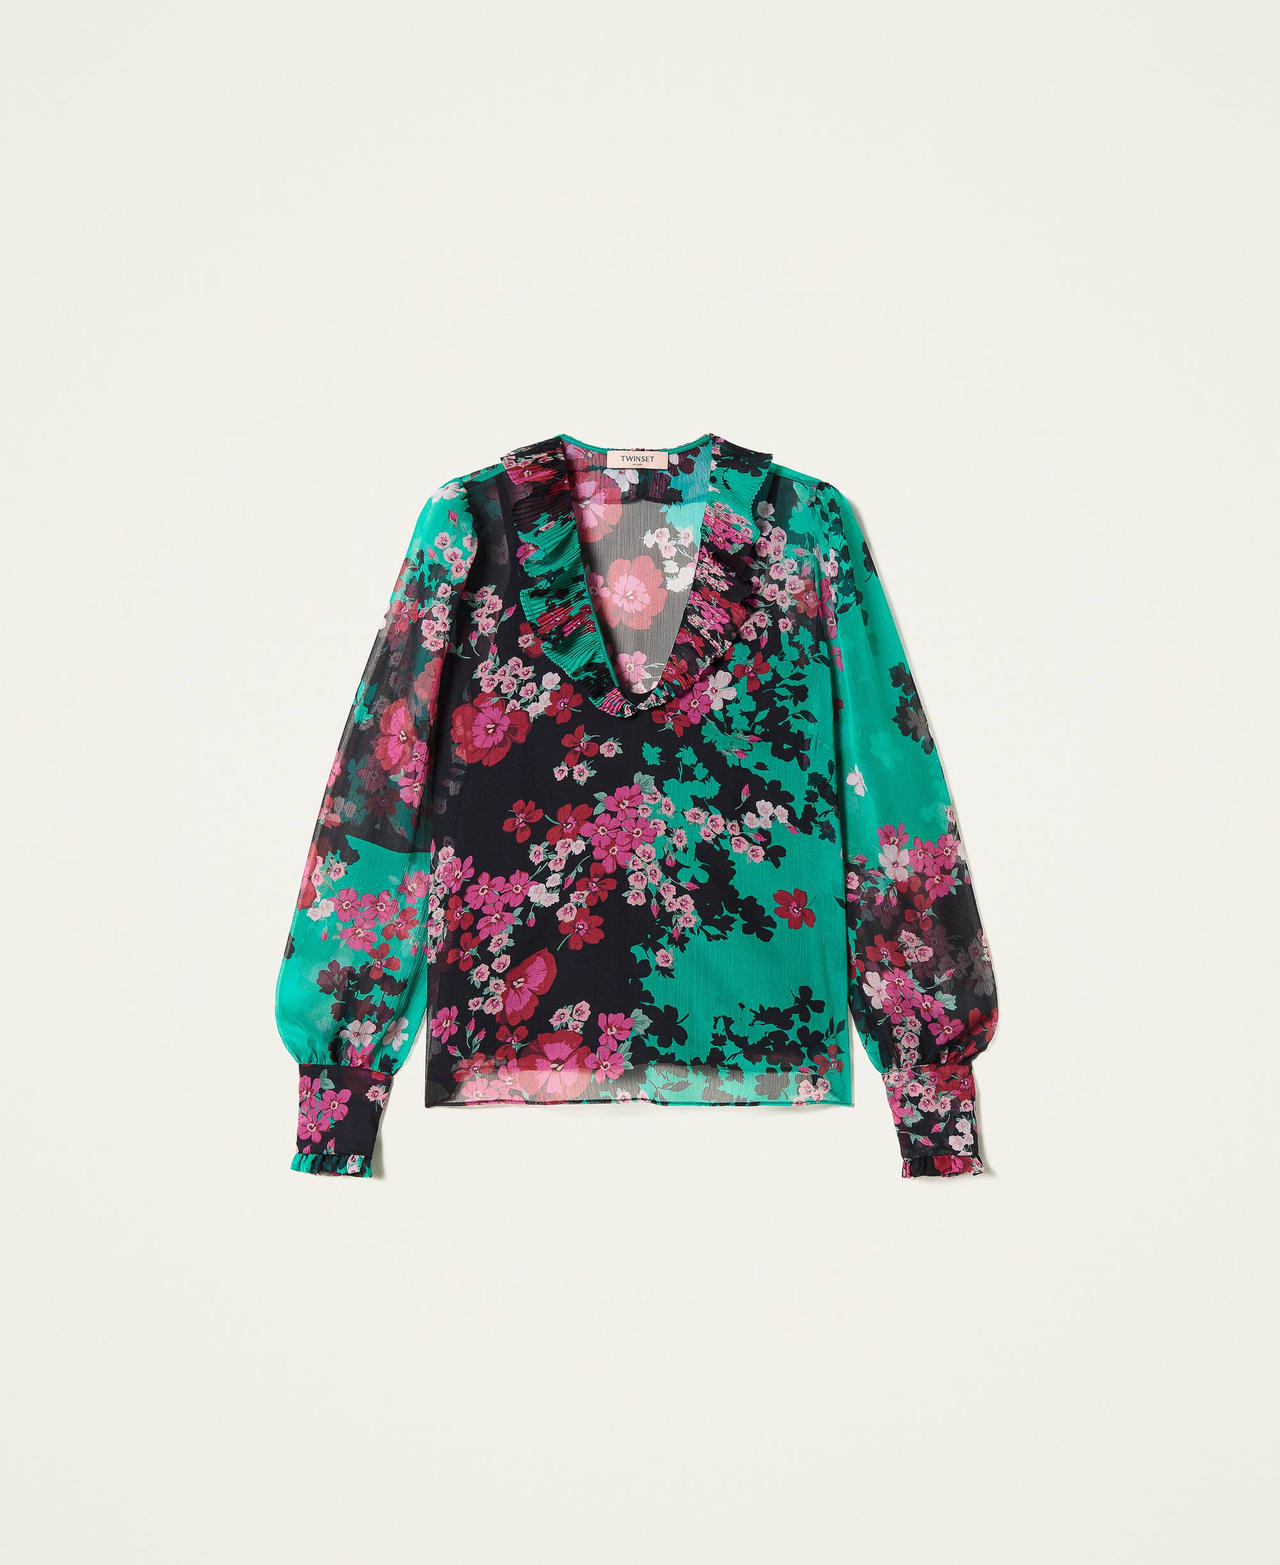 Floral creponne blouse with ruffles "Peppermint" Green / Black Autumn Flowers Print Woman 222TP2693-0S